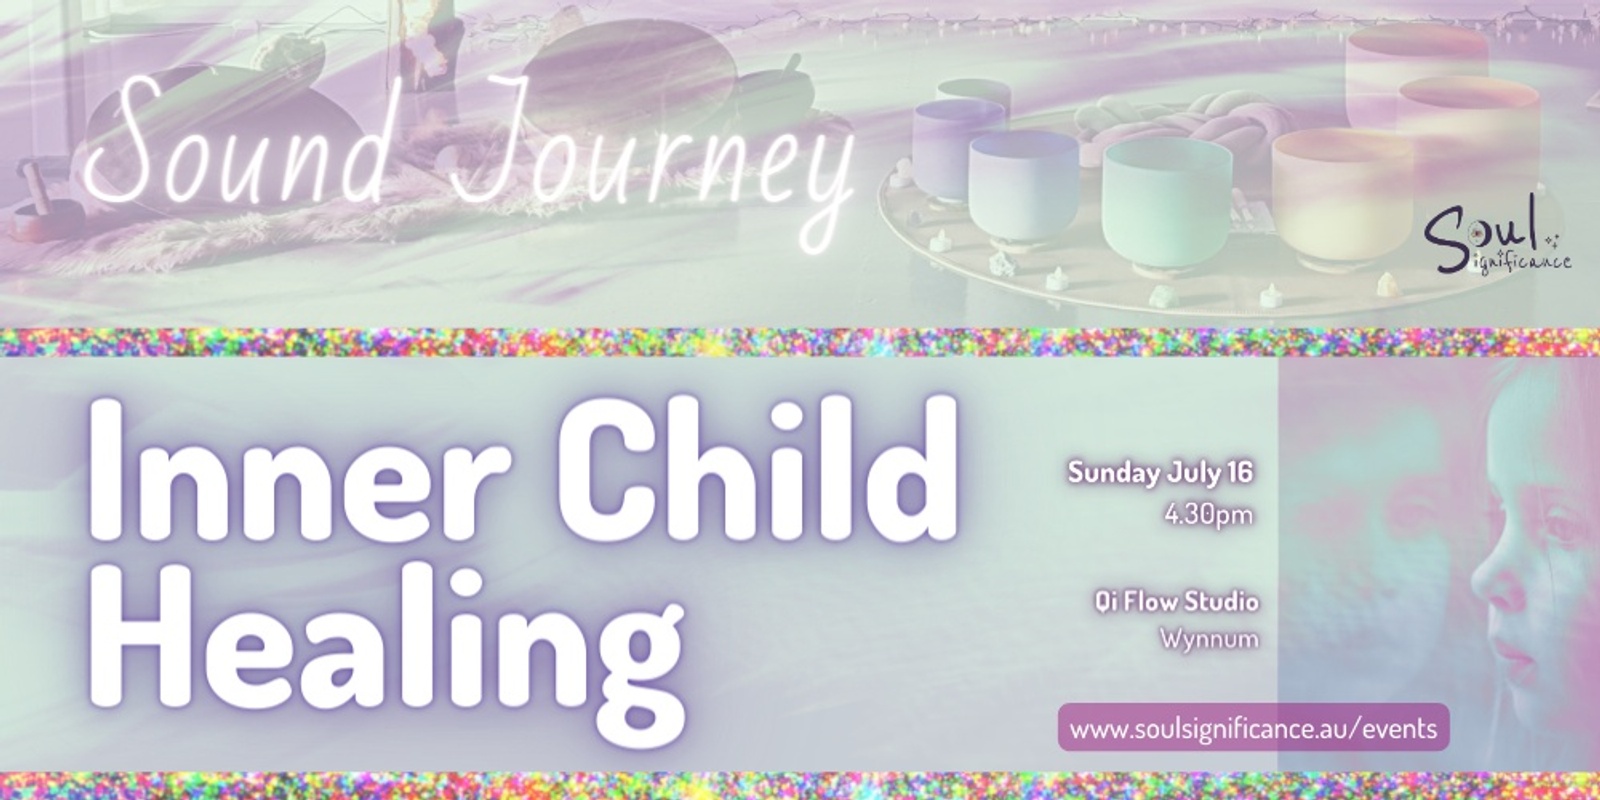 A Spiritual Sound Journey - Heal Your Inner Child